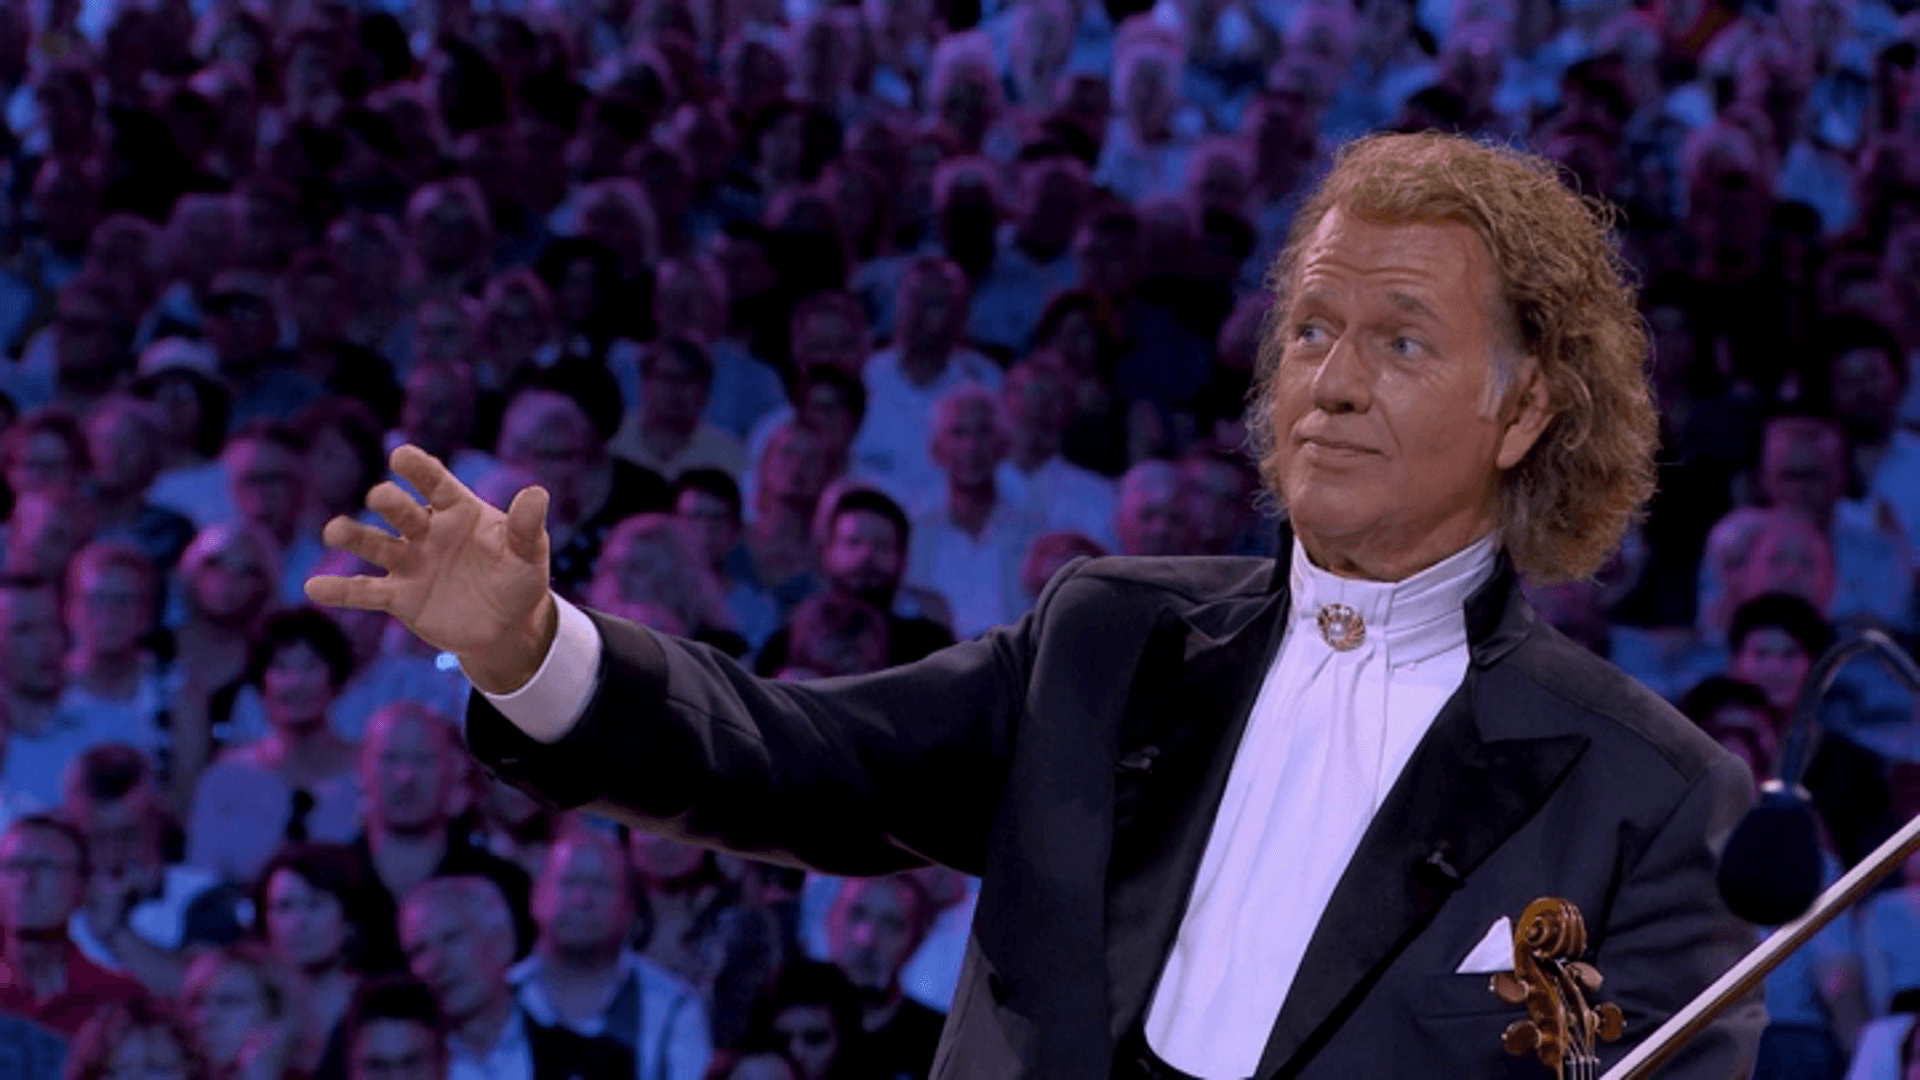 André Rieu And His Johann Strauss Orchestra - Love In Maastricht